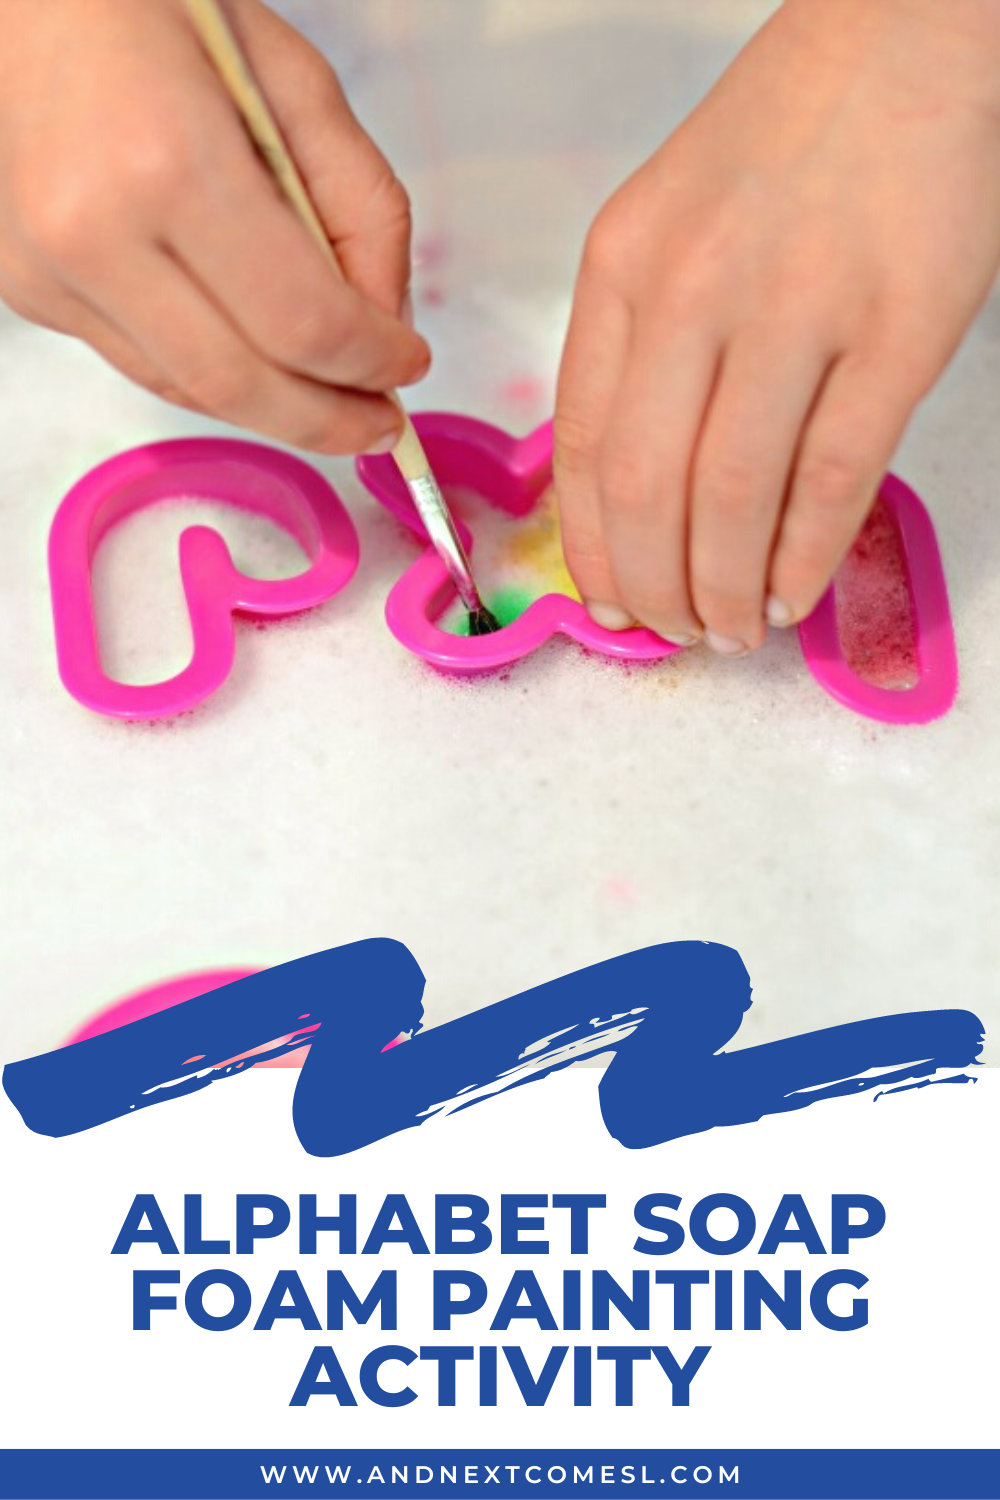 Alphabet soap foam painting activity is a lot of fun for toddlers and preschoolers